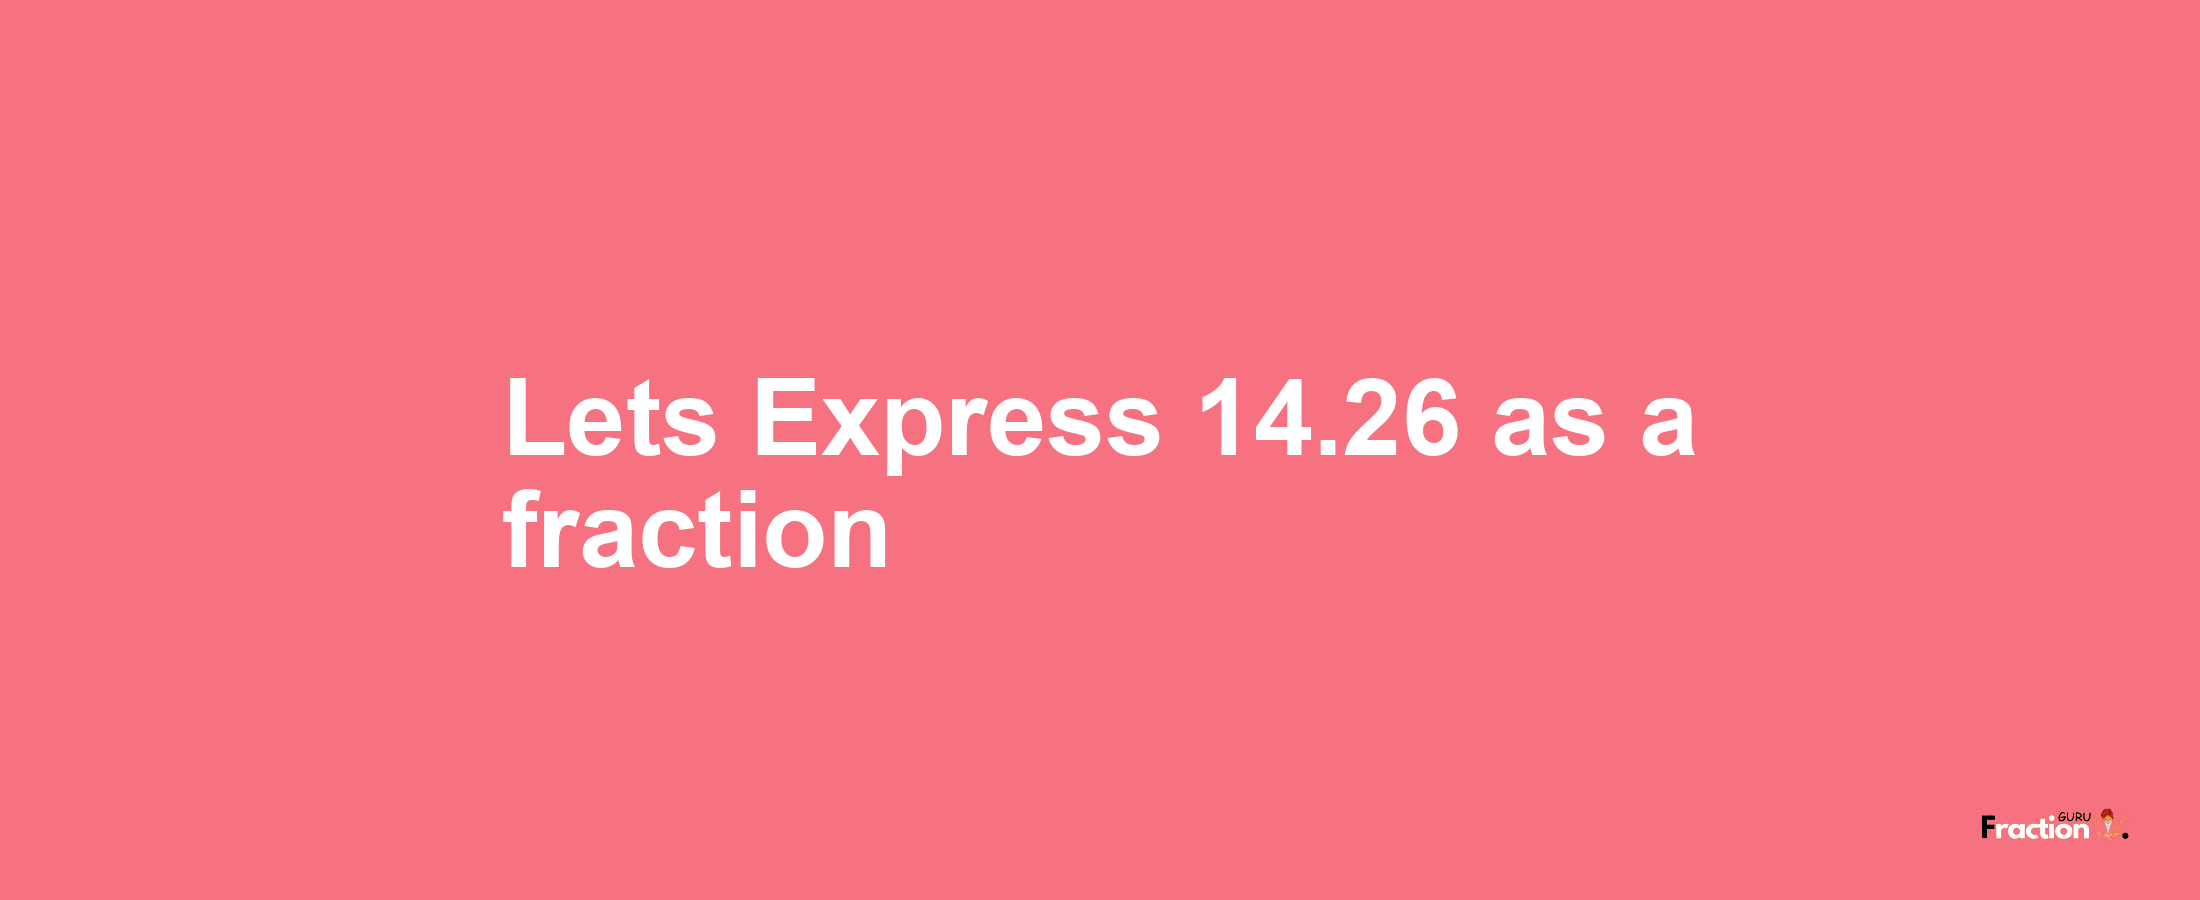 Lets Express 14.26 as afraction